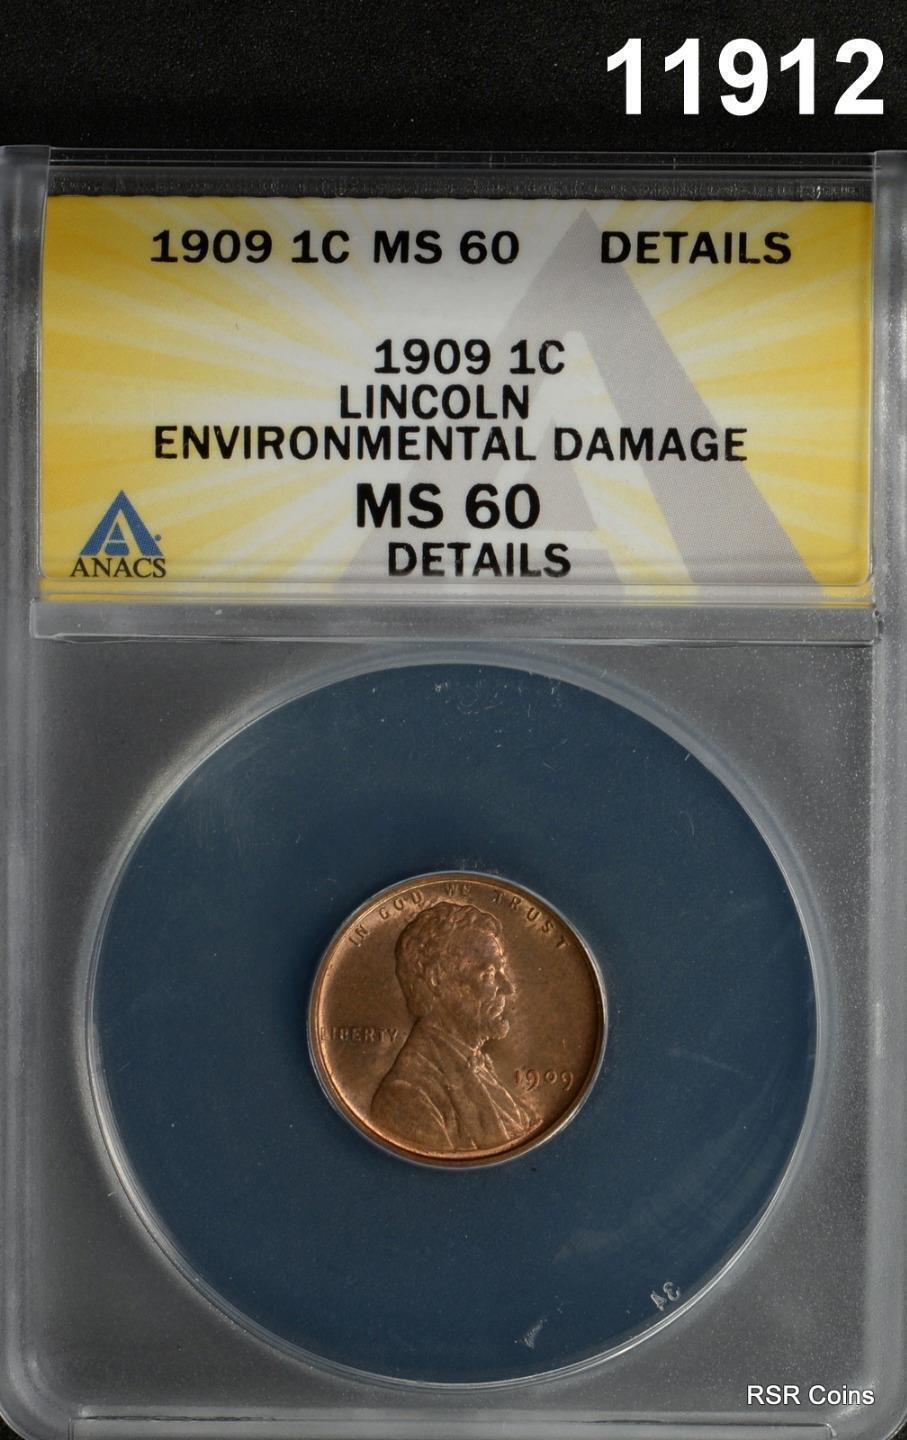 1909 LINCOLN CENT ANACS CERTIFIED MS60 ENVIRONMENTAL DAMAGE #11912